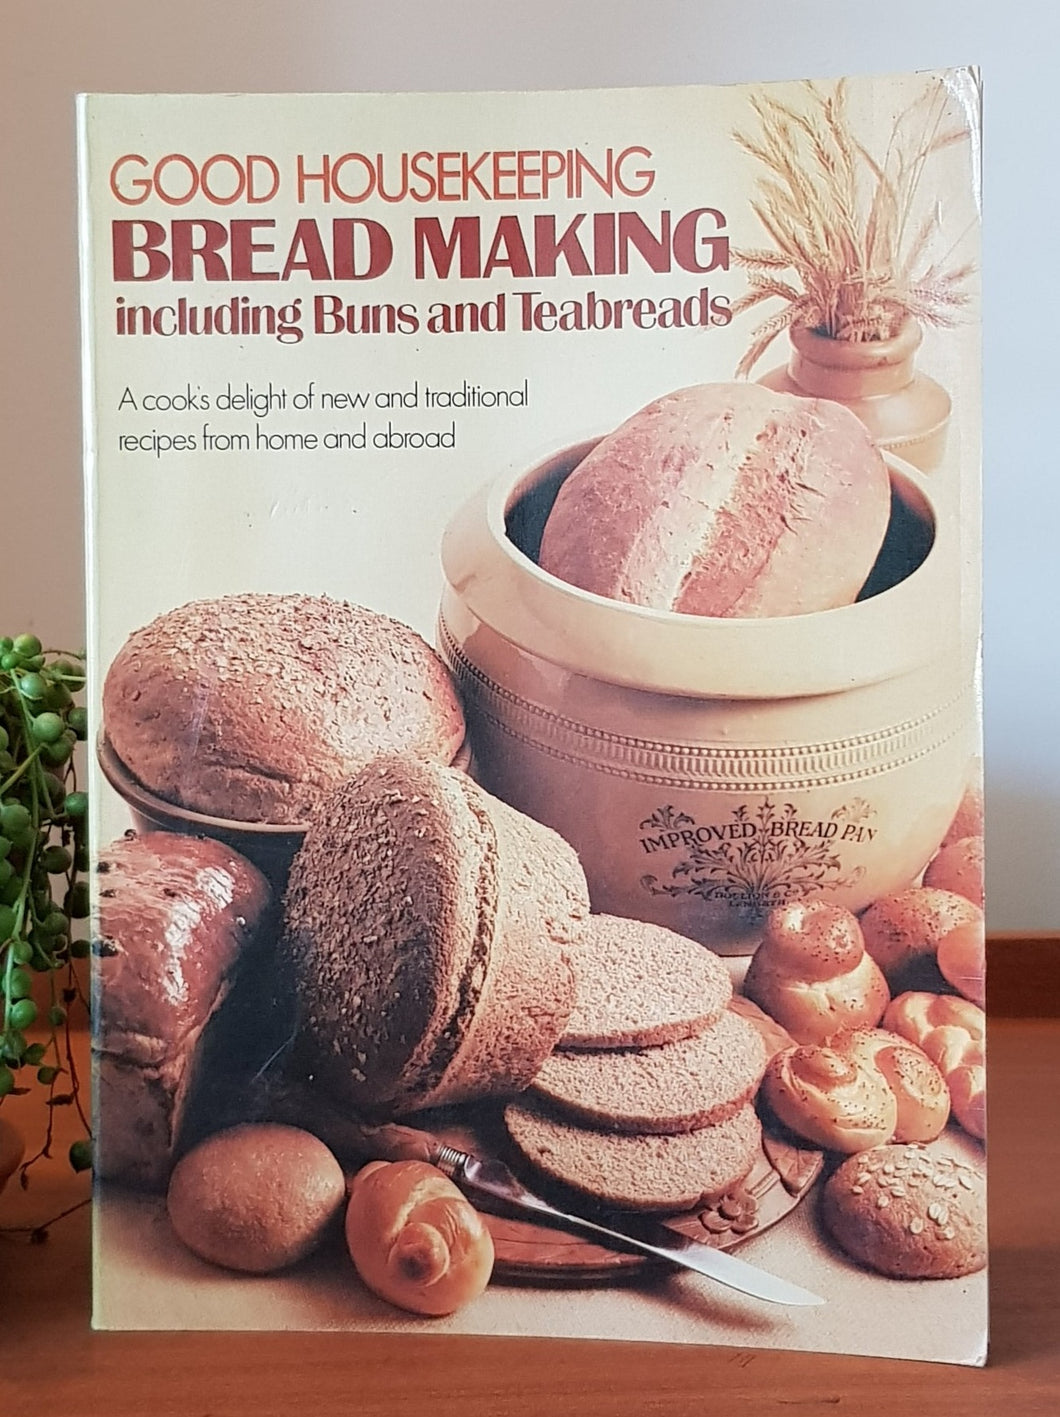 Bread Making: Including Buns & Teabreads by Good Housekeeping Institute